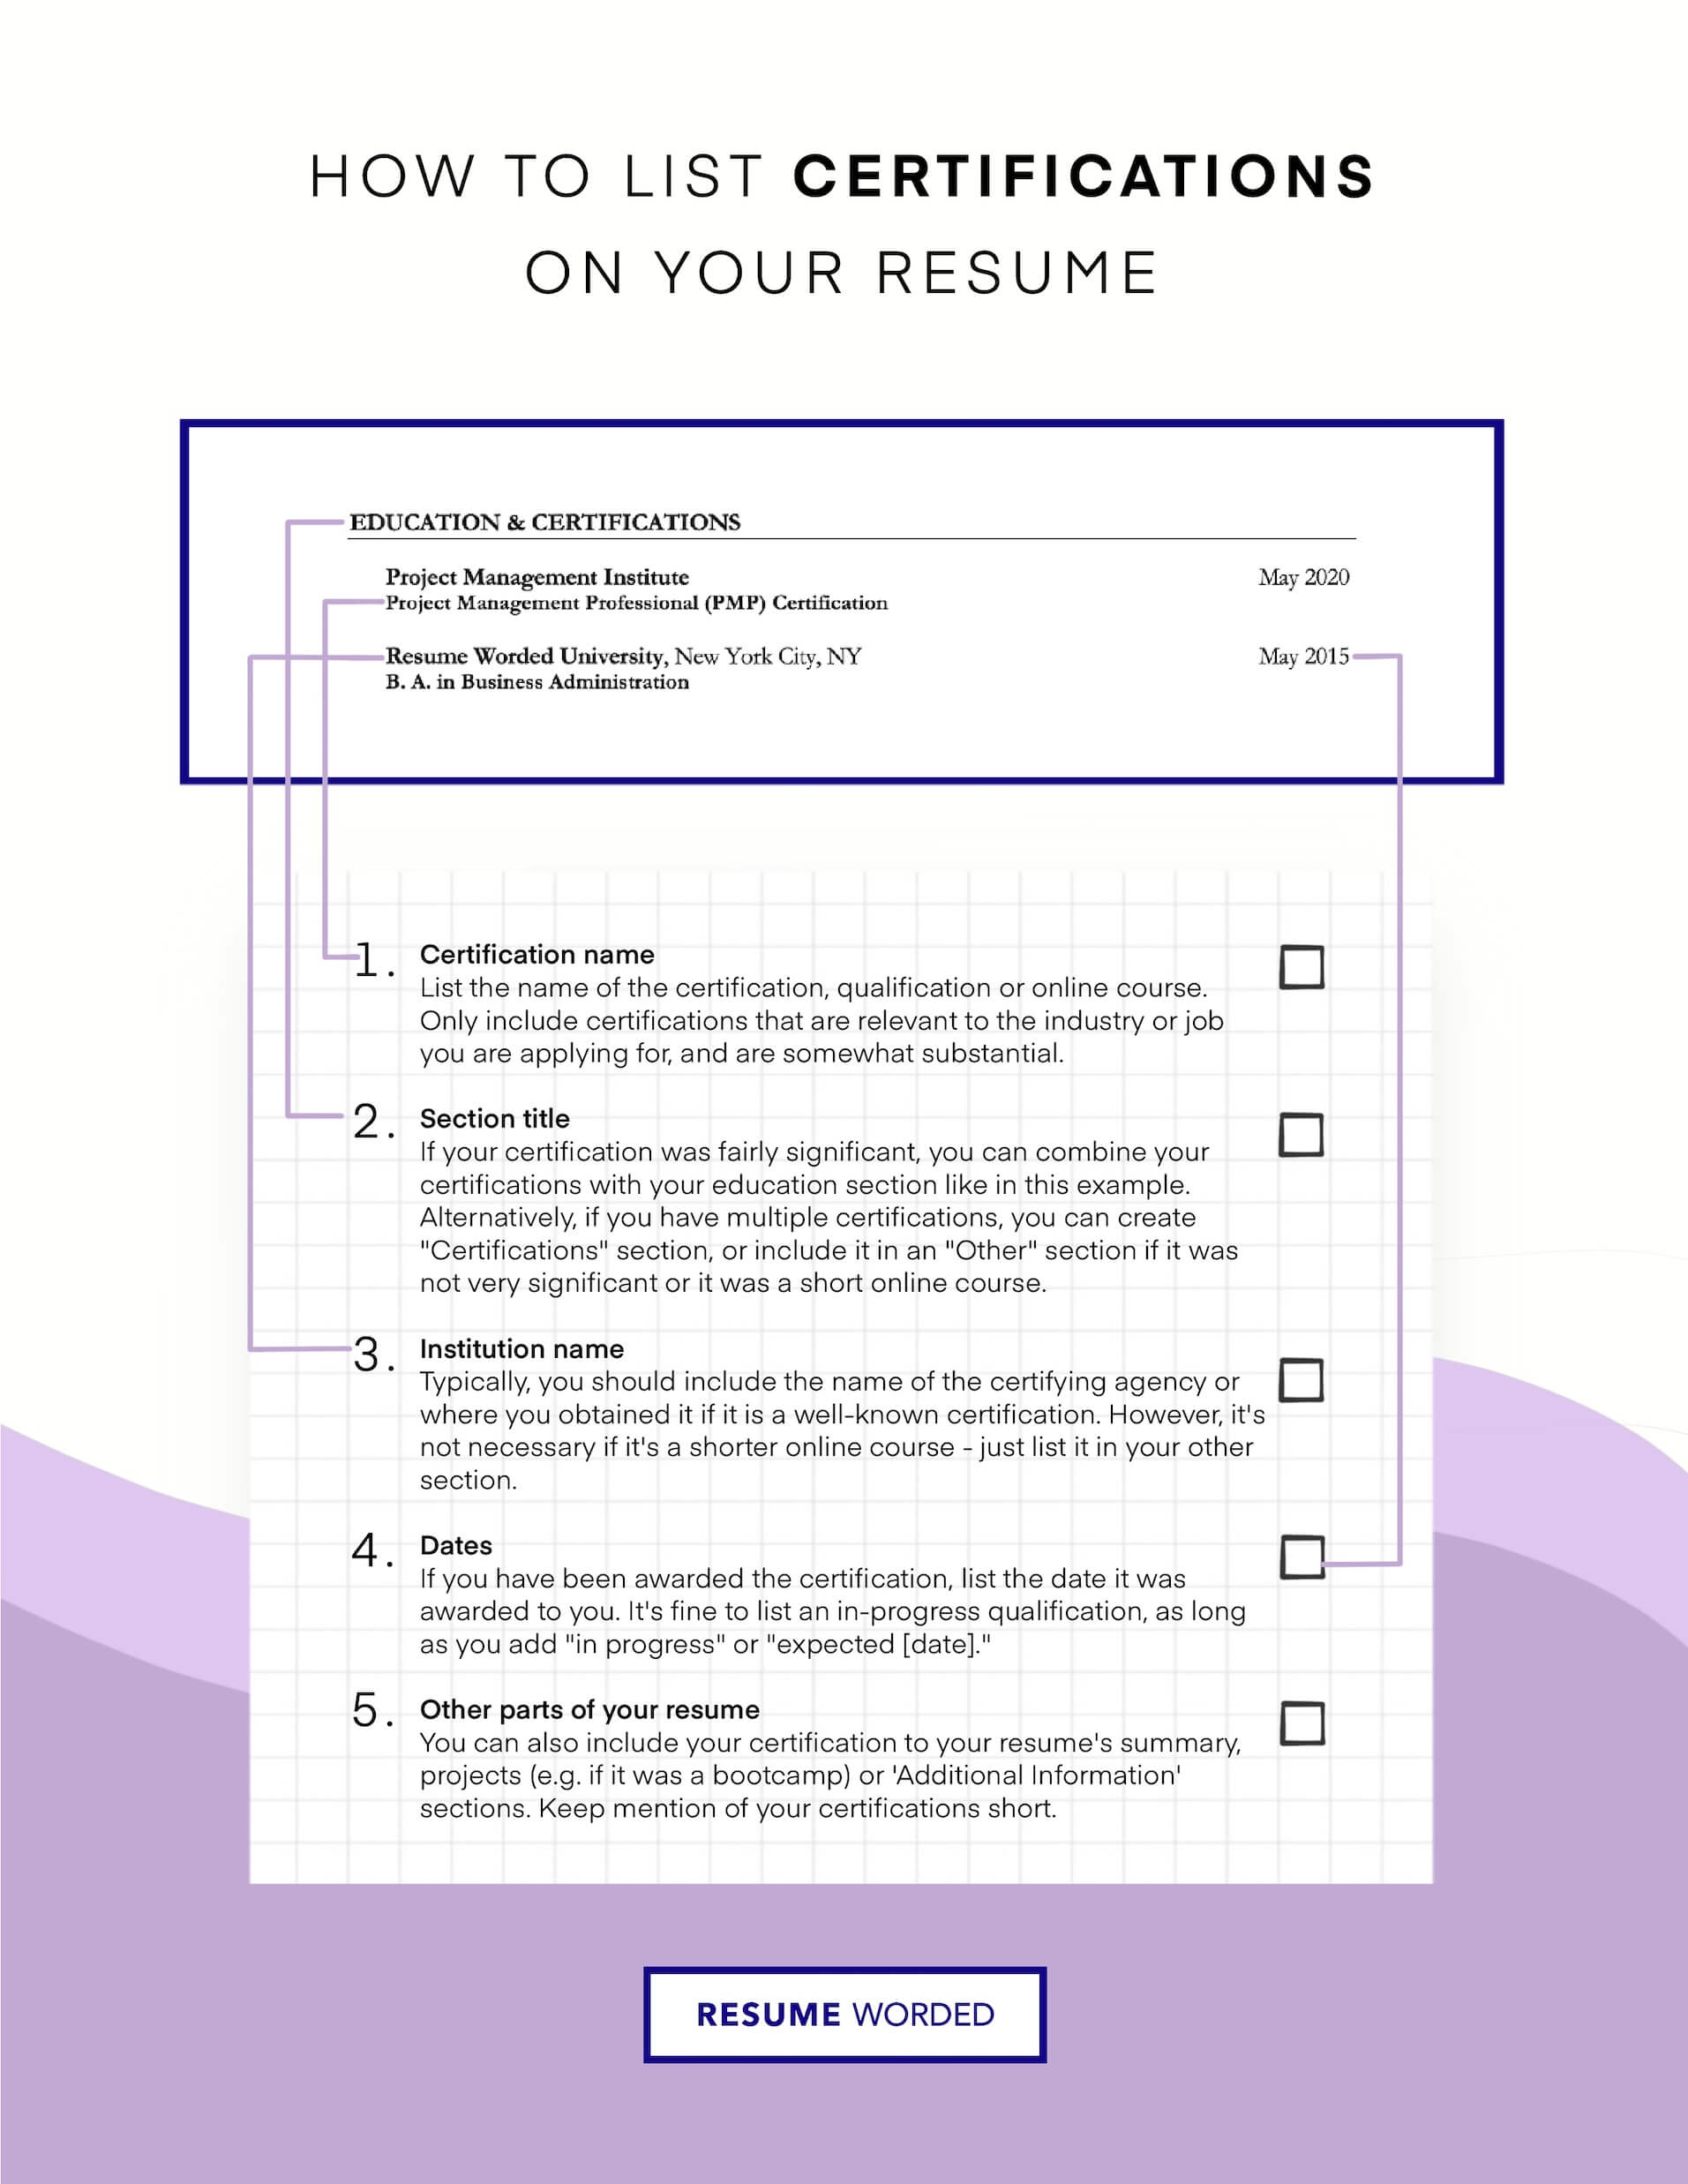 Include your Agile coach certification on your resume. - Agile Coach Resume